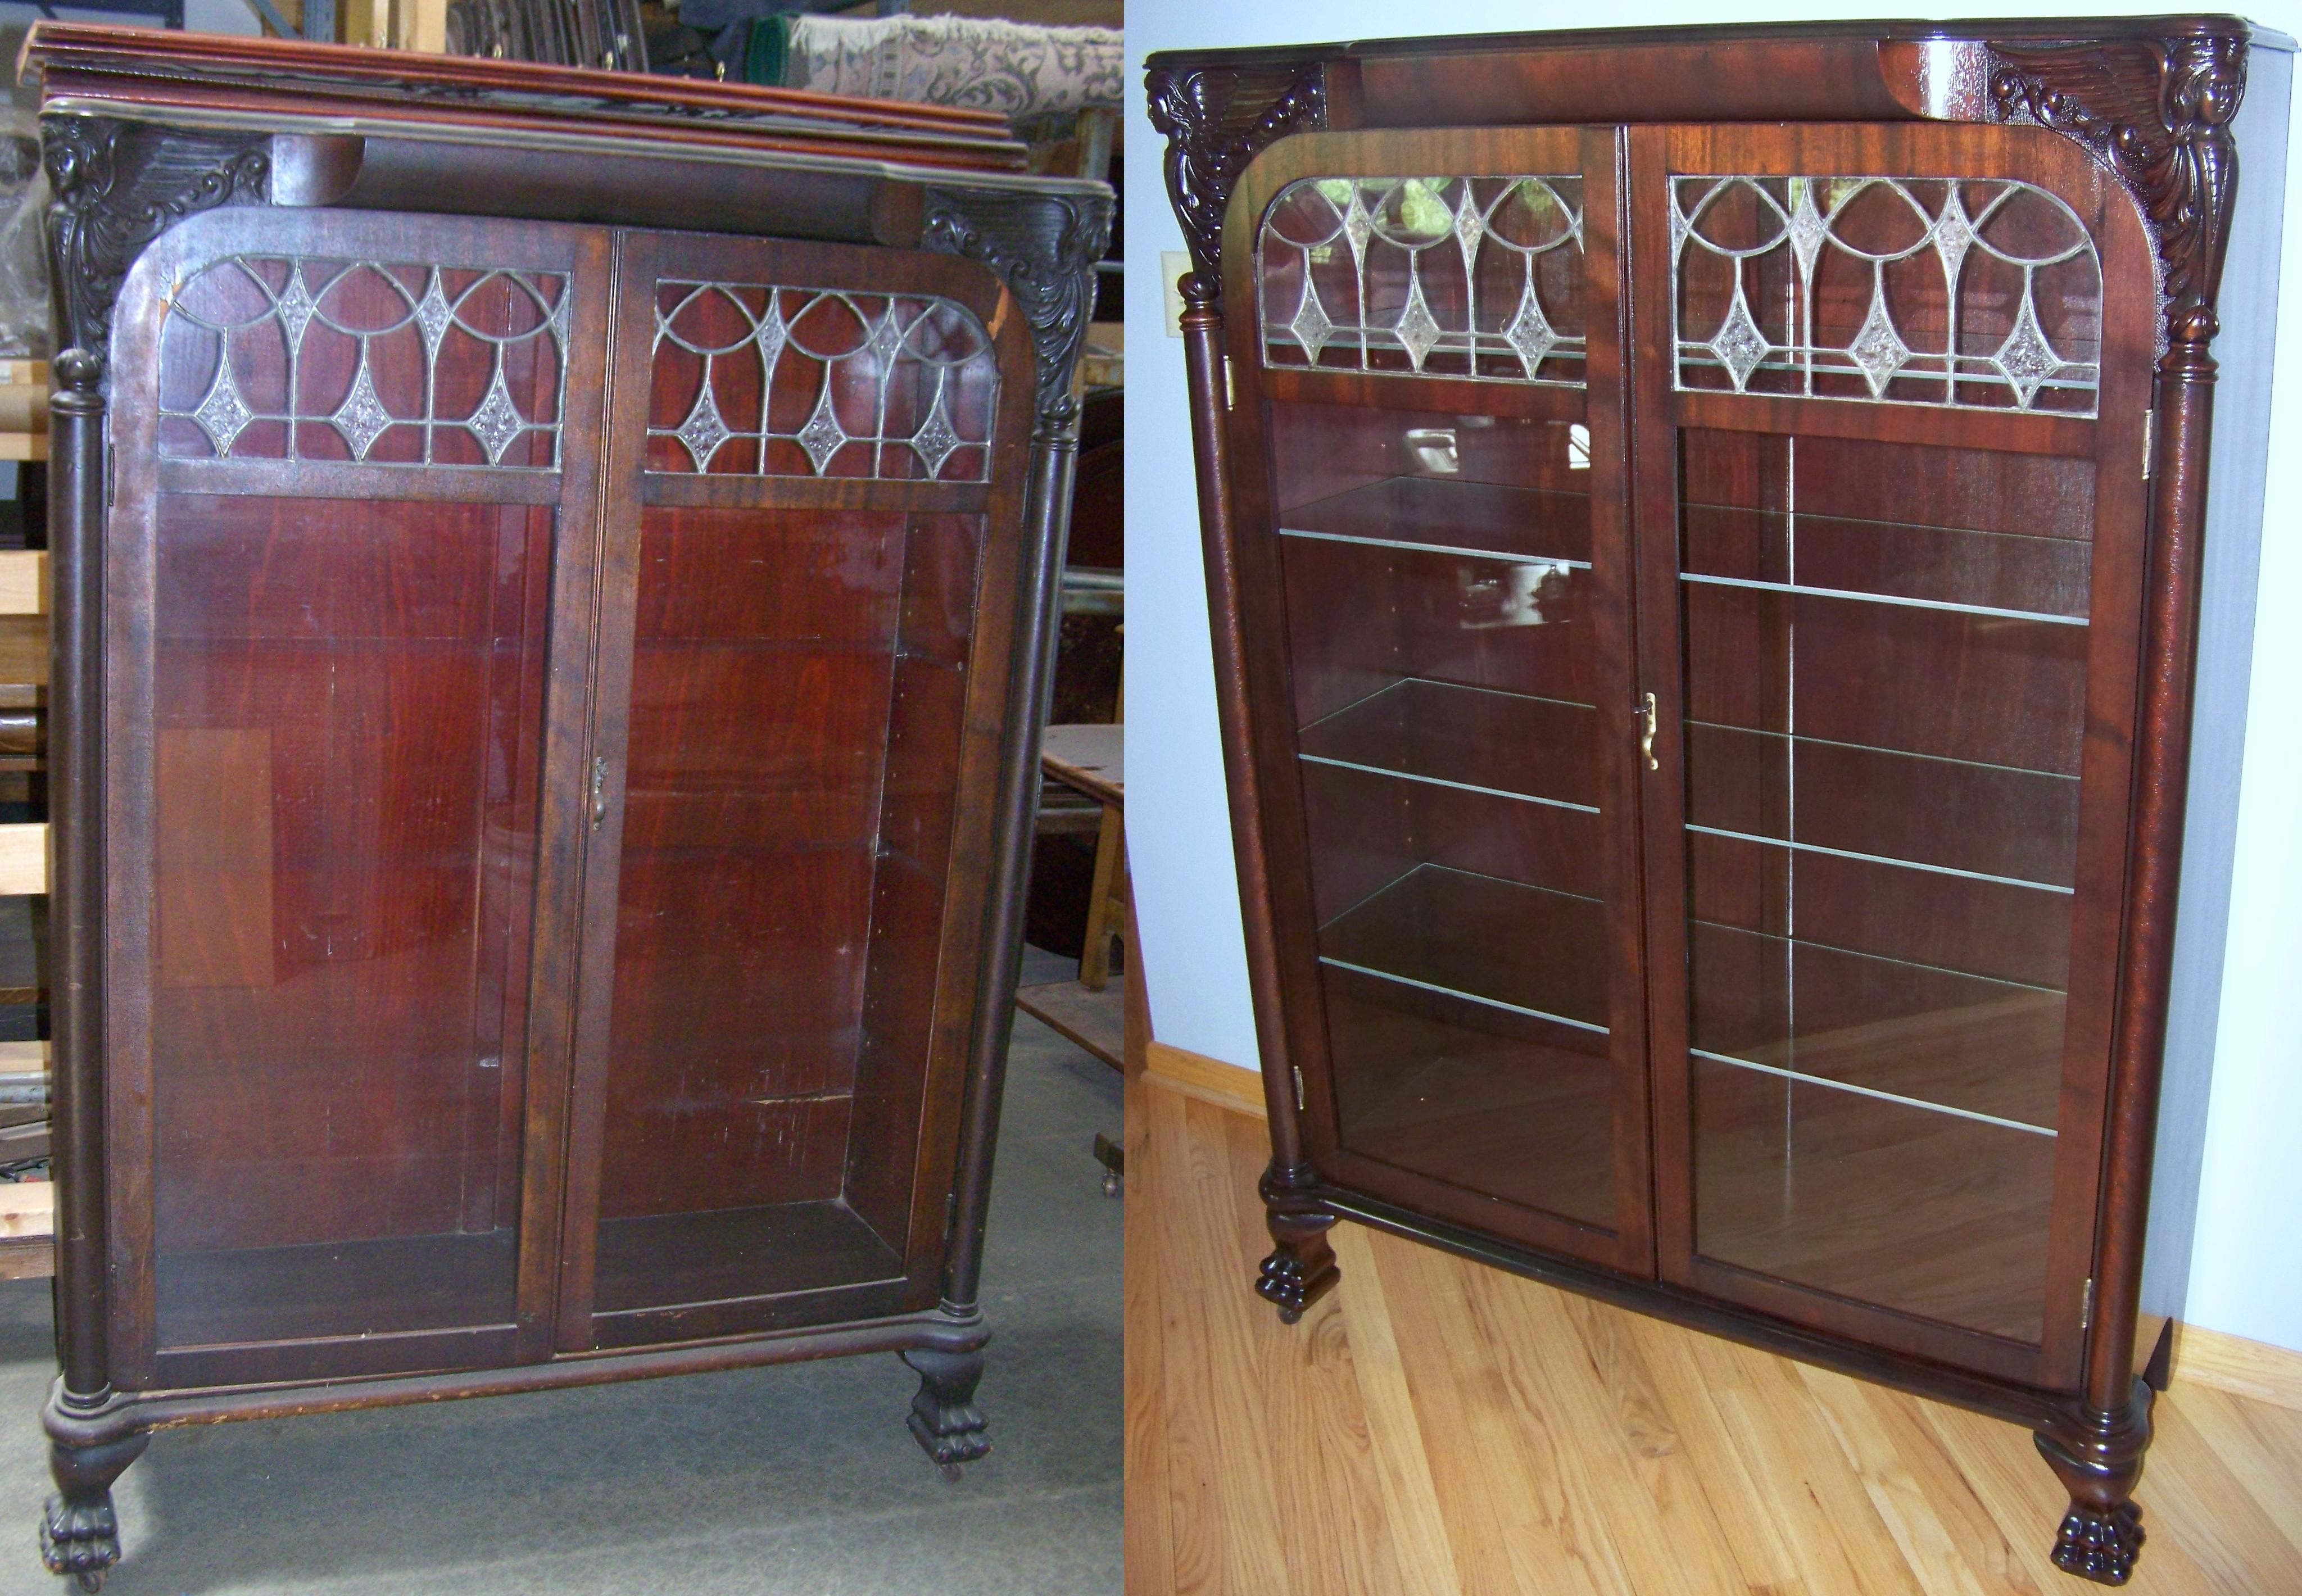 Antique Cabinet We Were Chosen By A Hartland Customer To Restore Their Cabinet We Repaired All Loose Veneer, Furnished New Glass Shelves, Installed A Light System On The Interior, And Custom Finished The Cabinet To Fit Their Decor